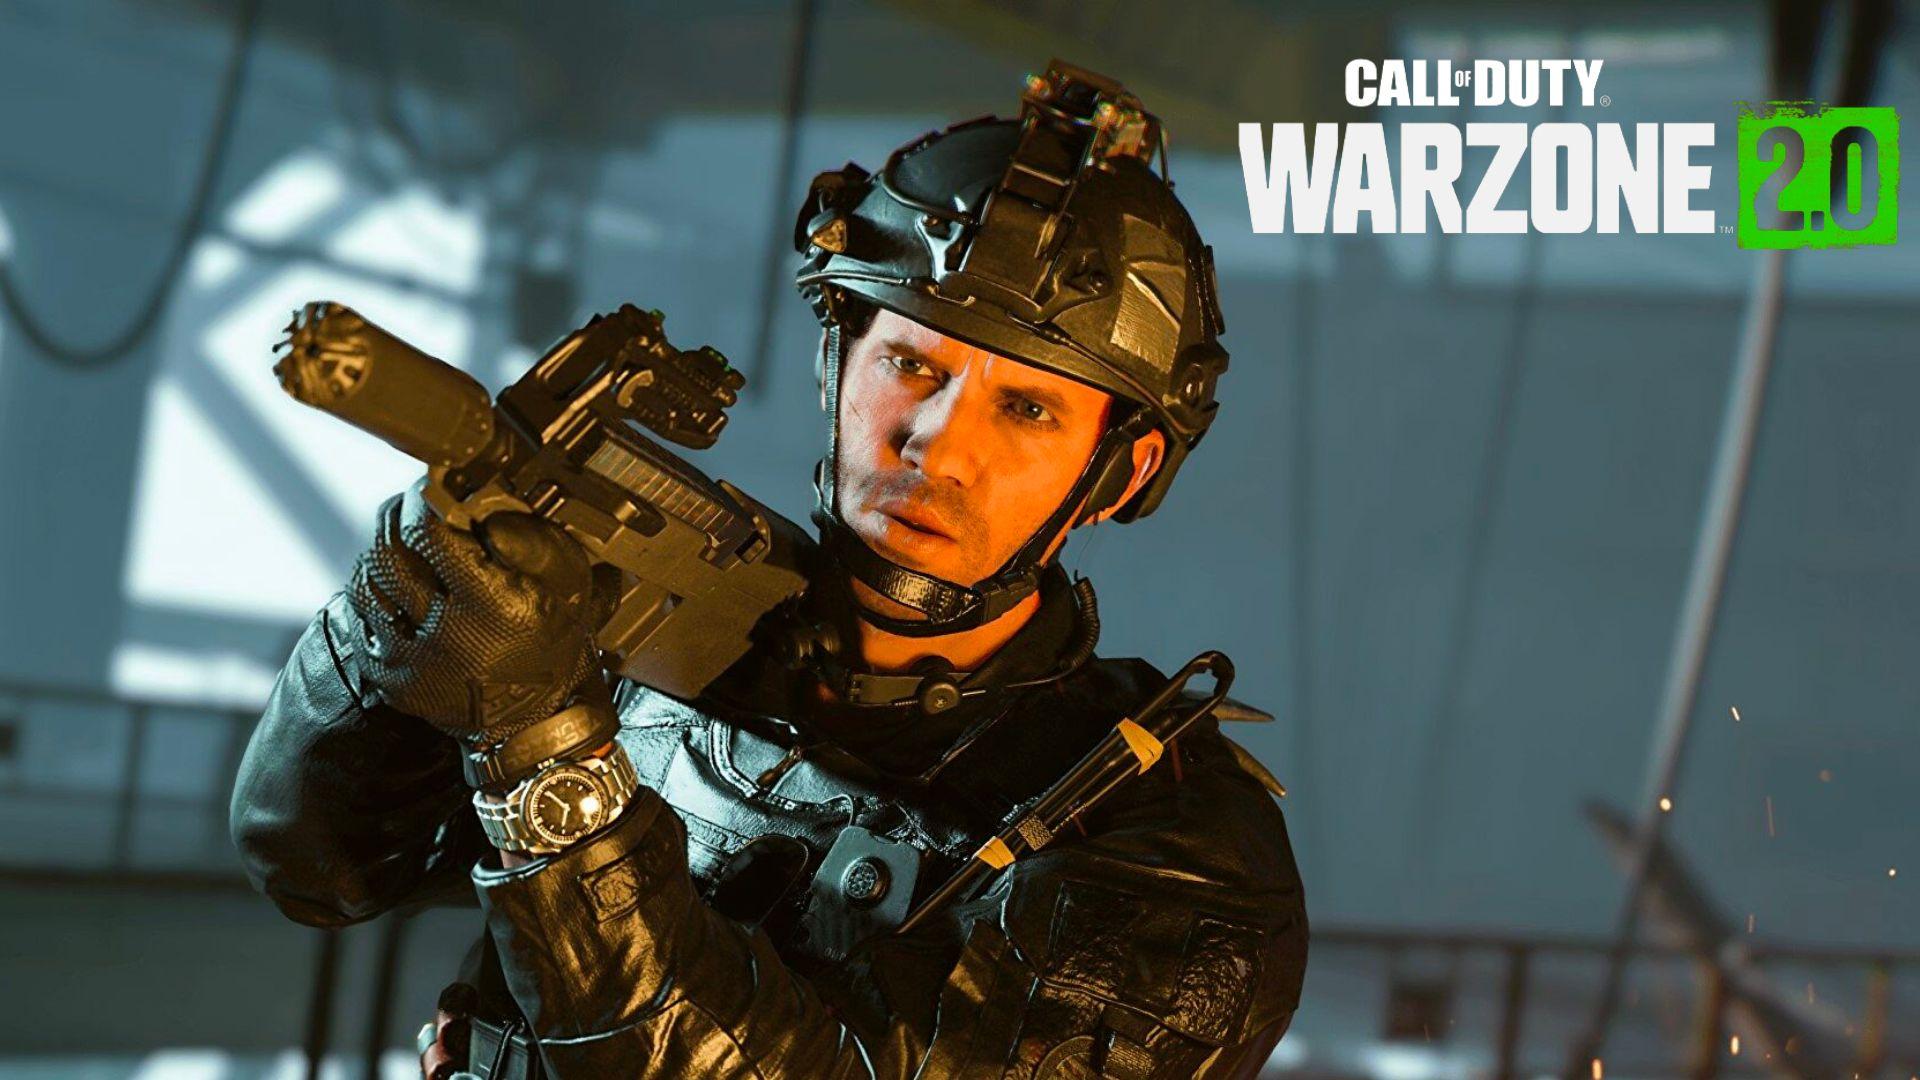 Warzone's new SMG makes no sense but lets see how it is. #warzone #mw2